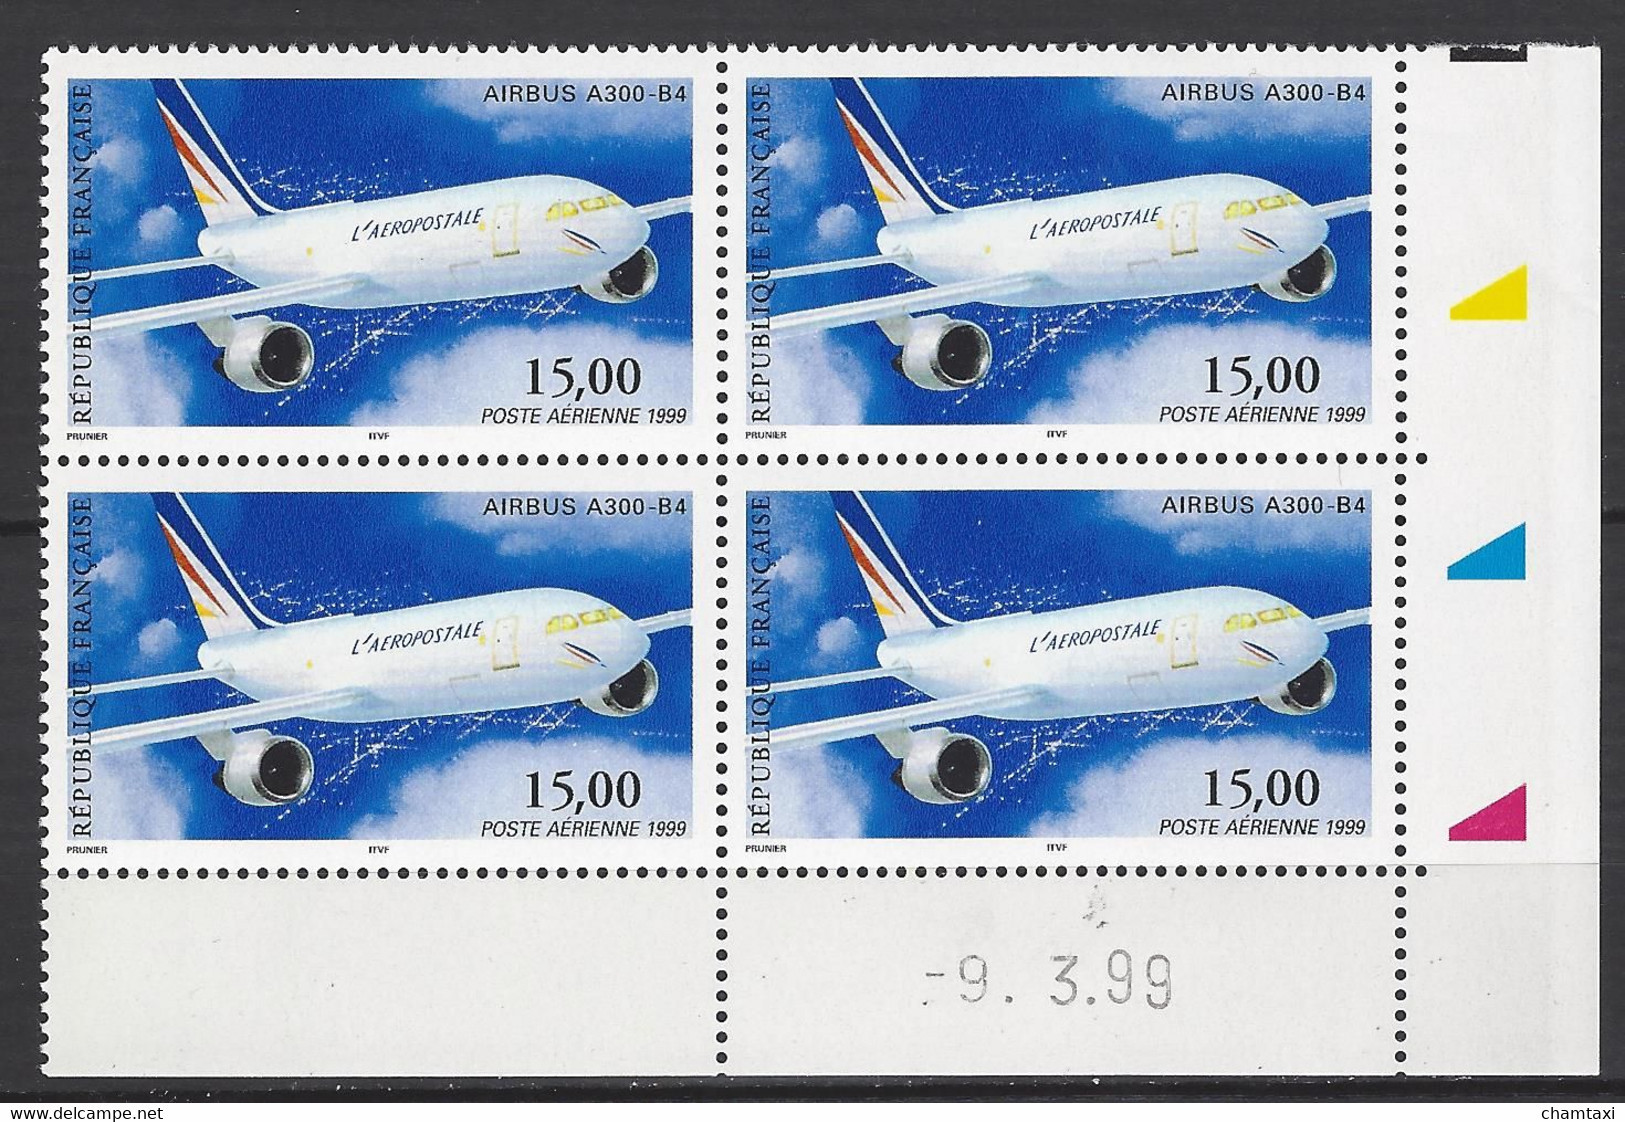 CD PA 63 FRANCE 1999 TIMBRE POSTE AERIENNE 63 AIRBUS A 300 B4  COIN DATE 63 : 9 / 3 / 99 - Luftpost